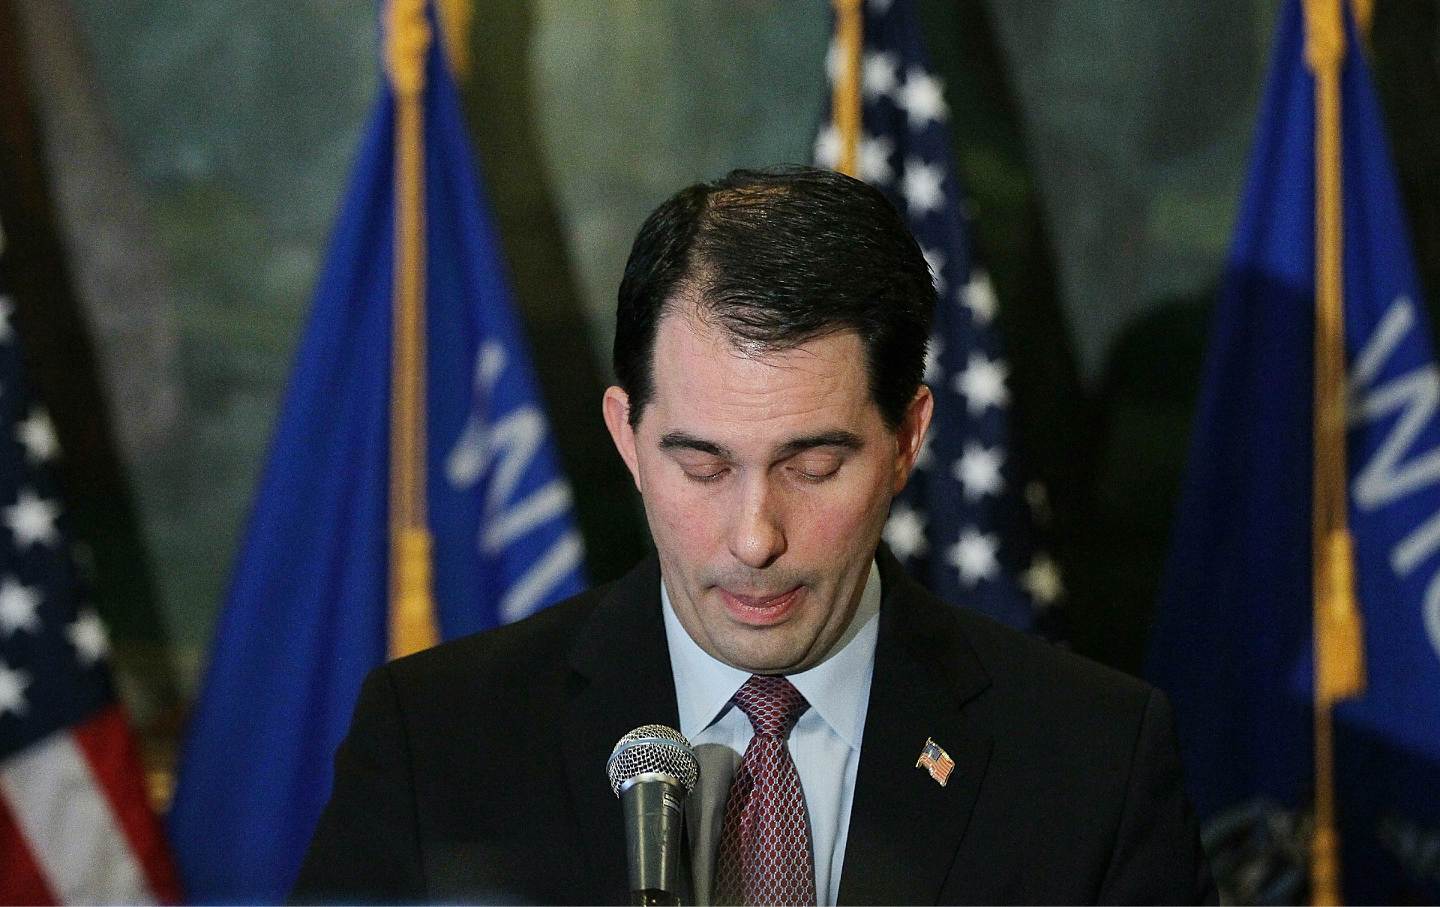 Wisconsin Governor Scott Walker during a press conference at the Wisconsin State Capitol on March 7, 2011, in Madison, Wis.